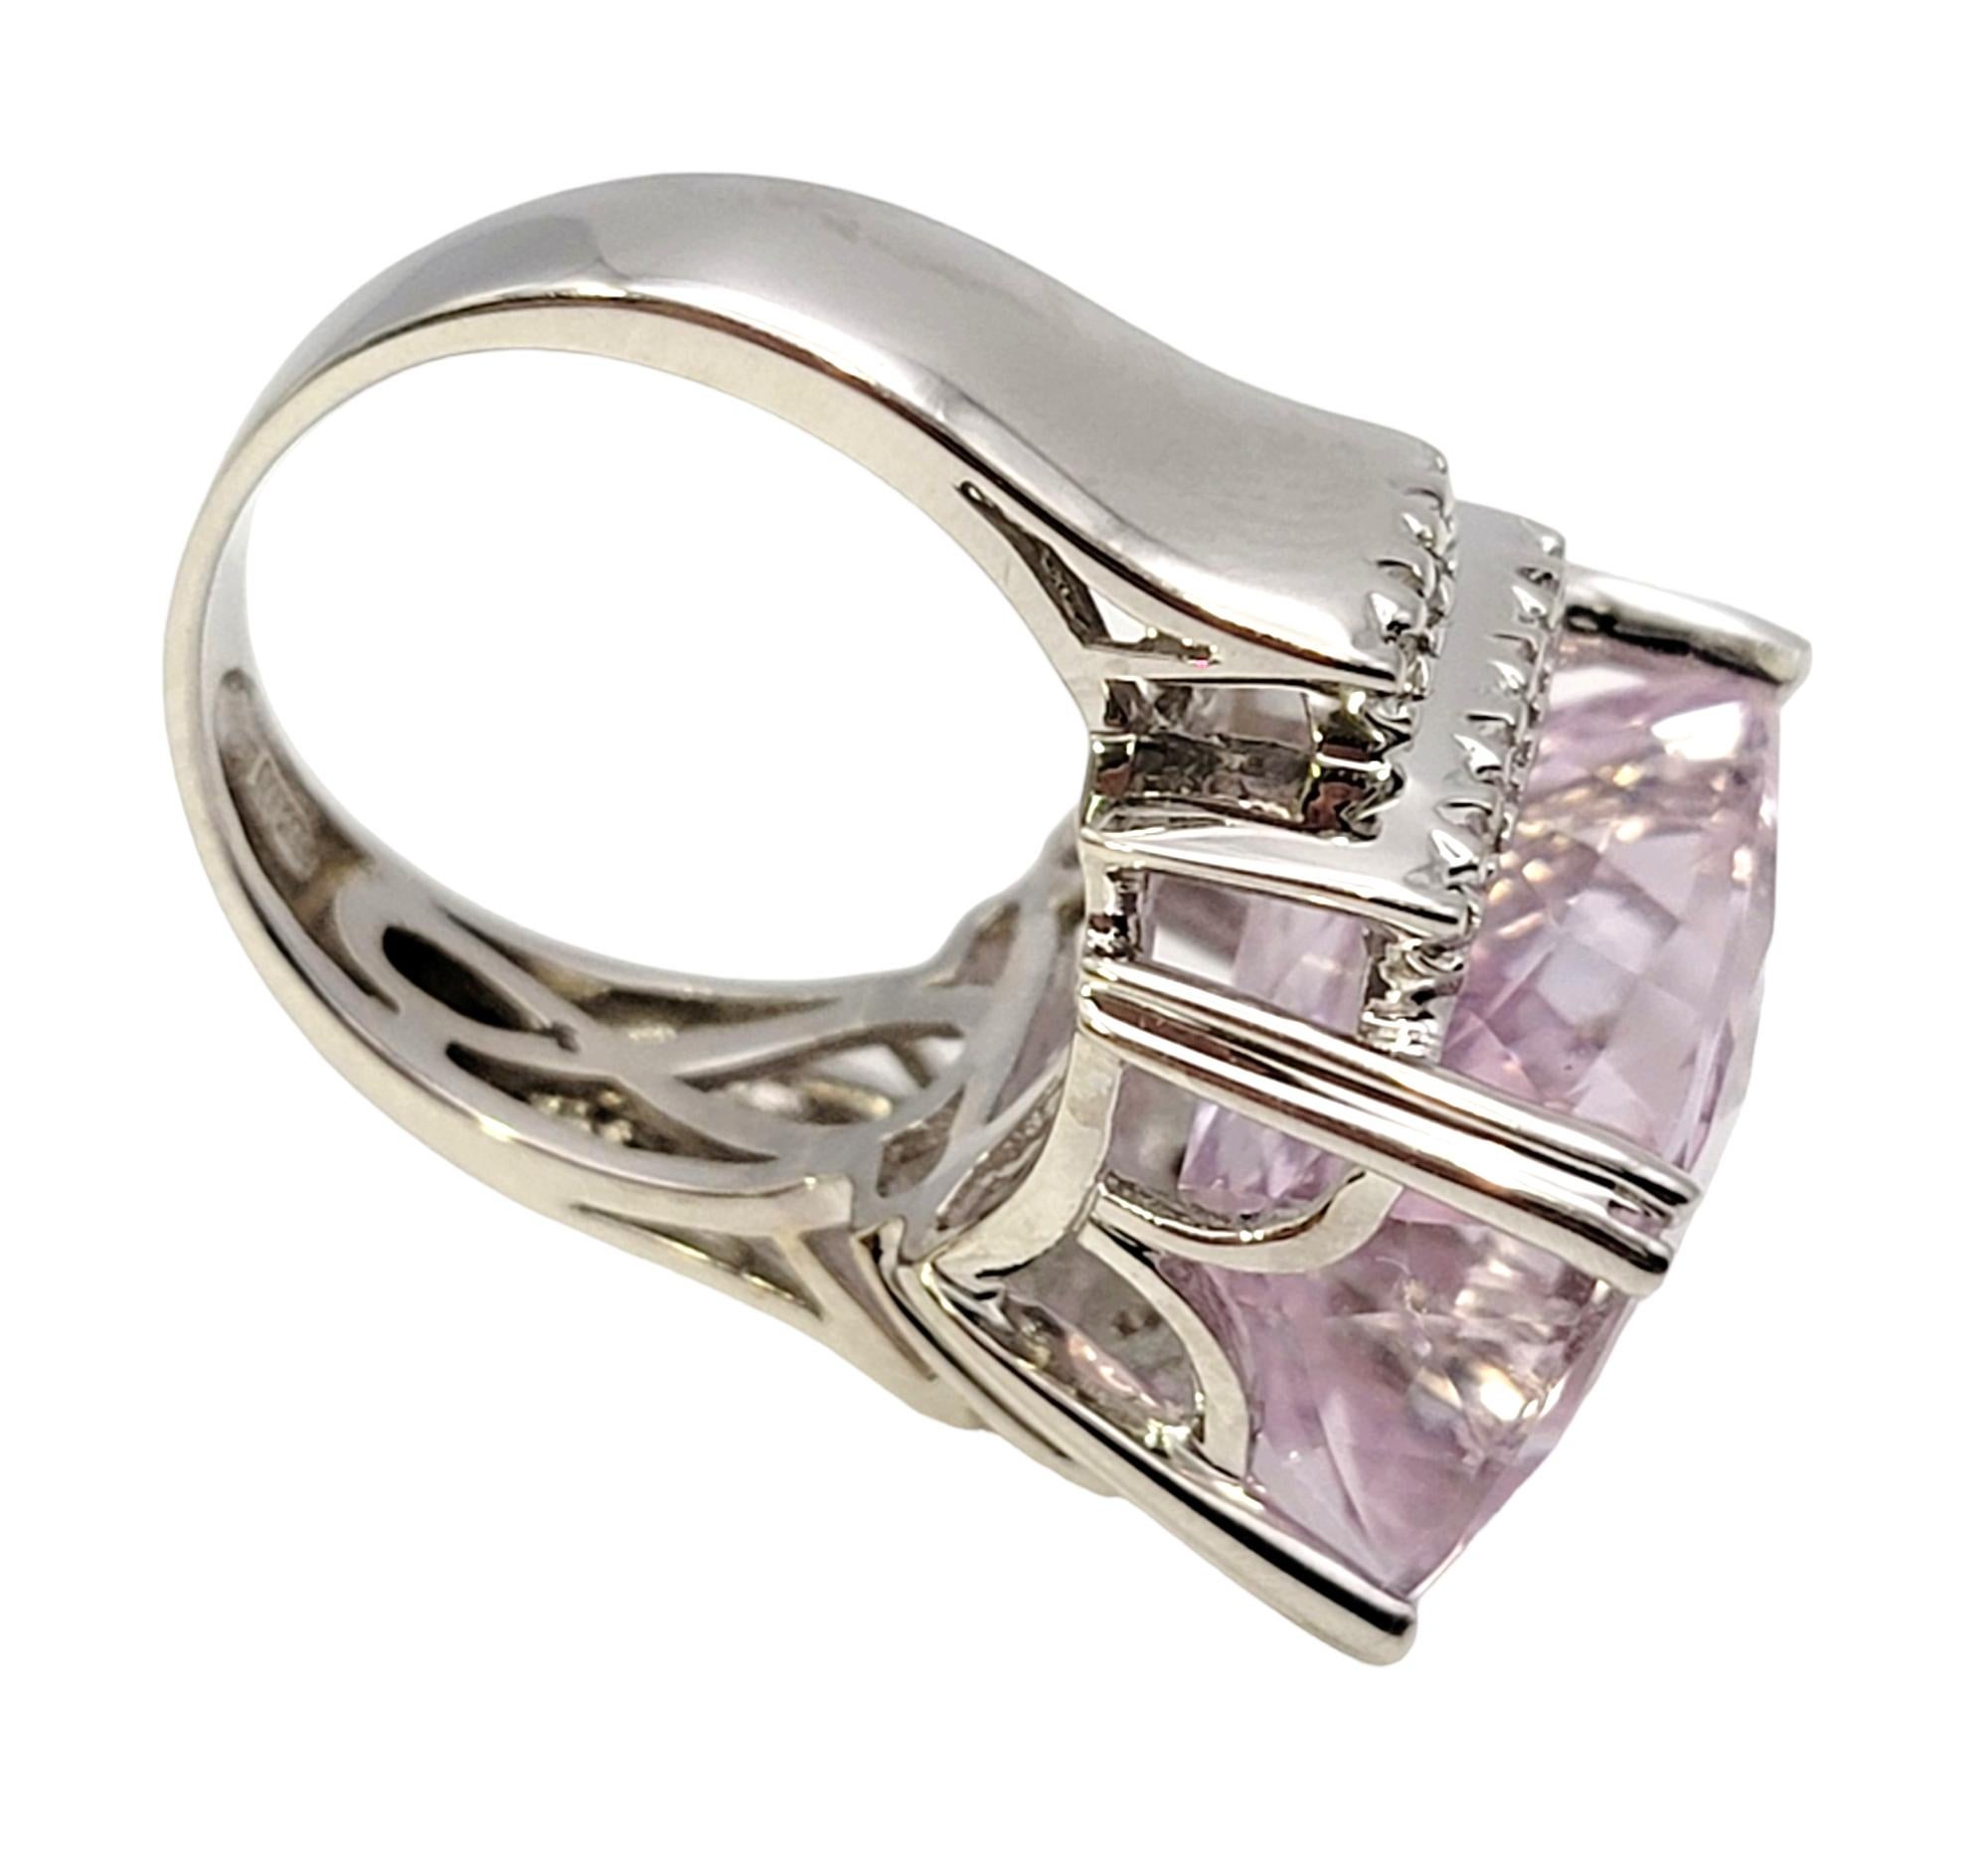 Huge Cushion Checkerboard Cut Kunzite and Diamond Cocktail Ring in 14 Karat Gold For Sale 4